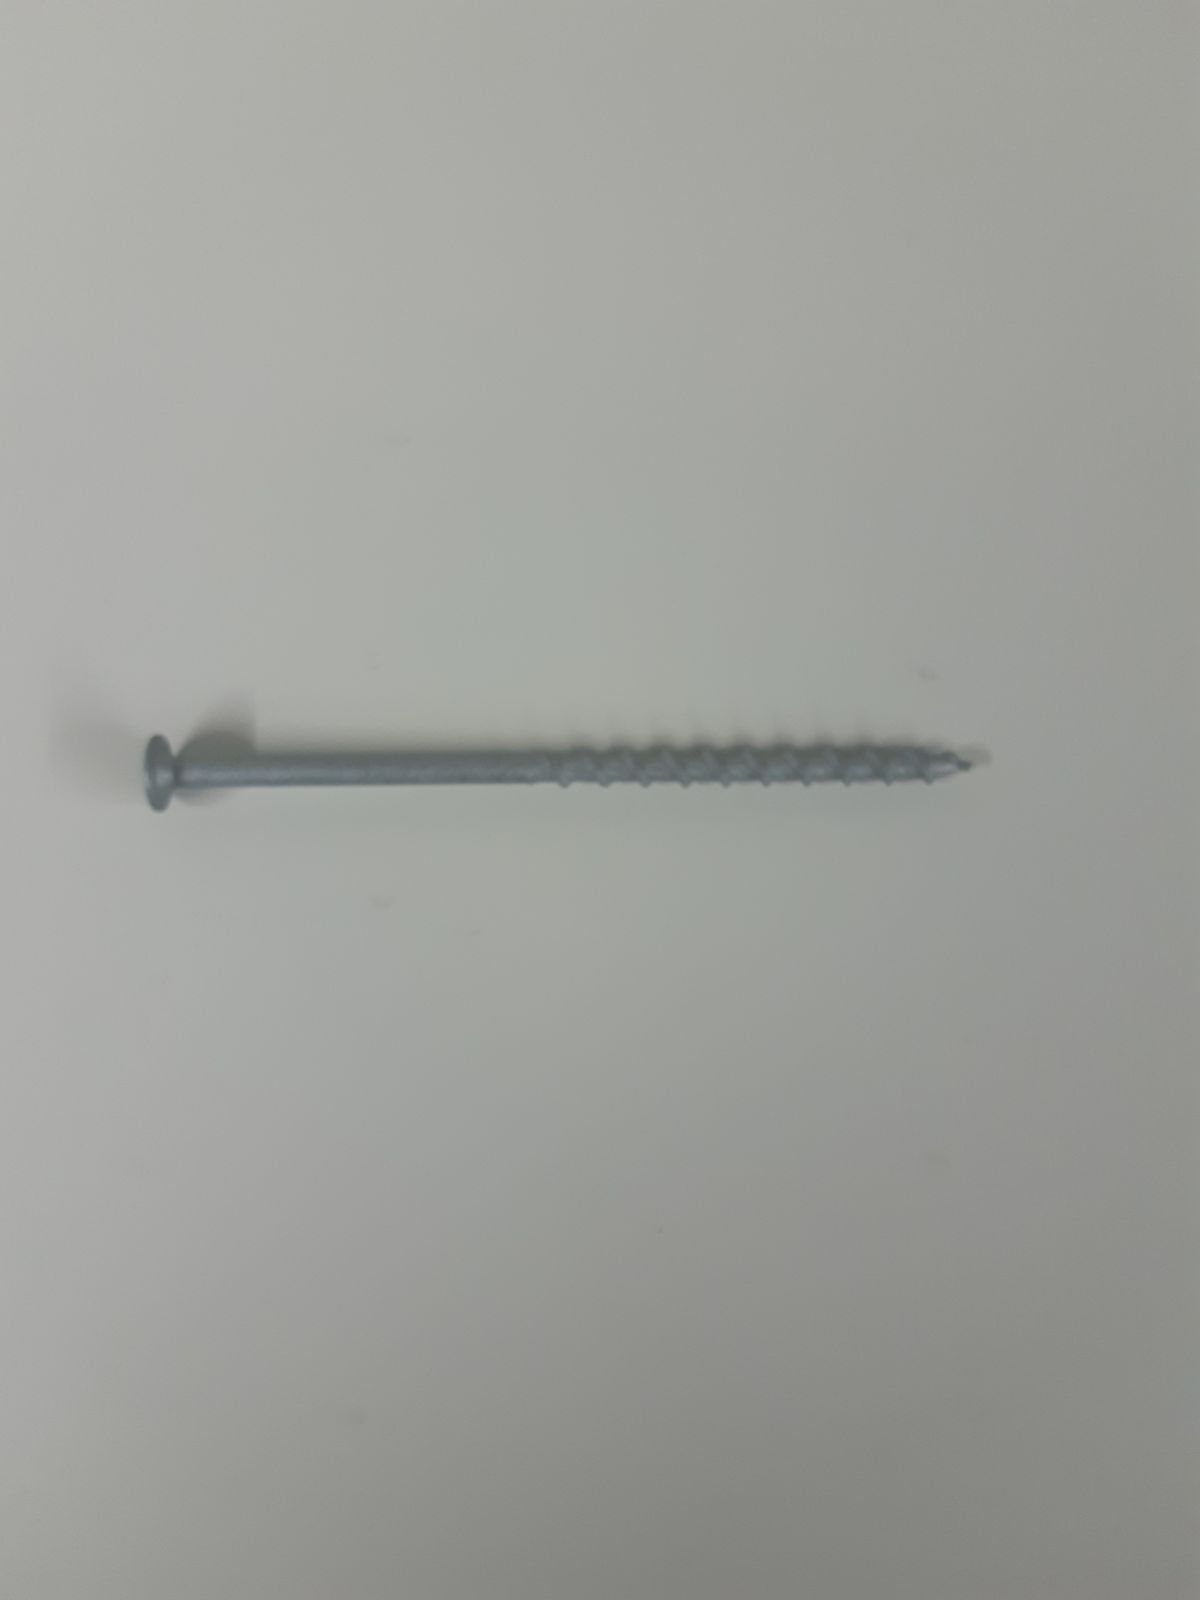 Aerated concrete screw with wafer head 8x160 (50pcs/pack)